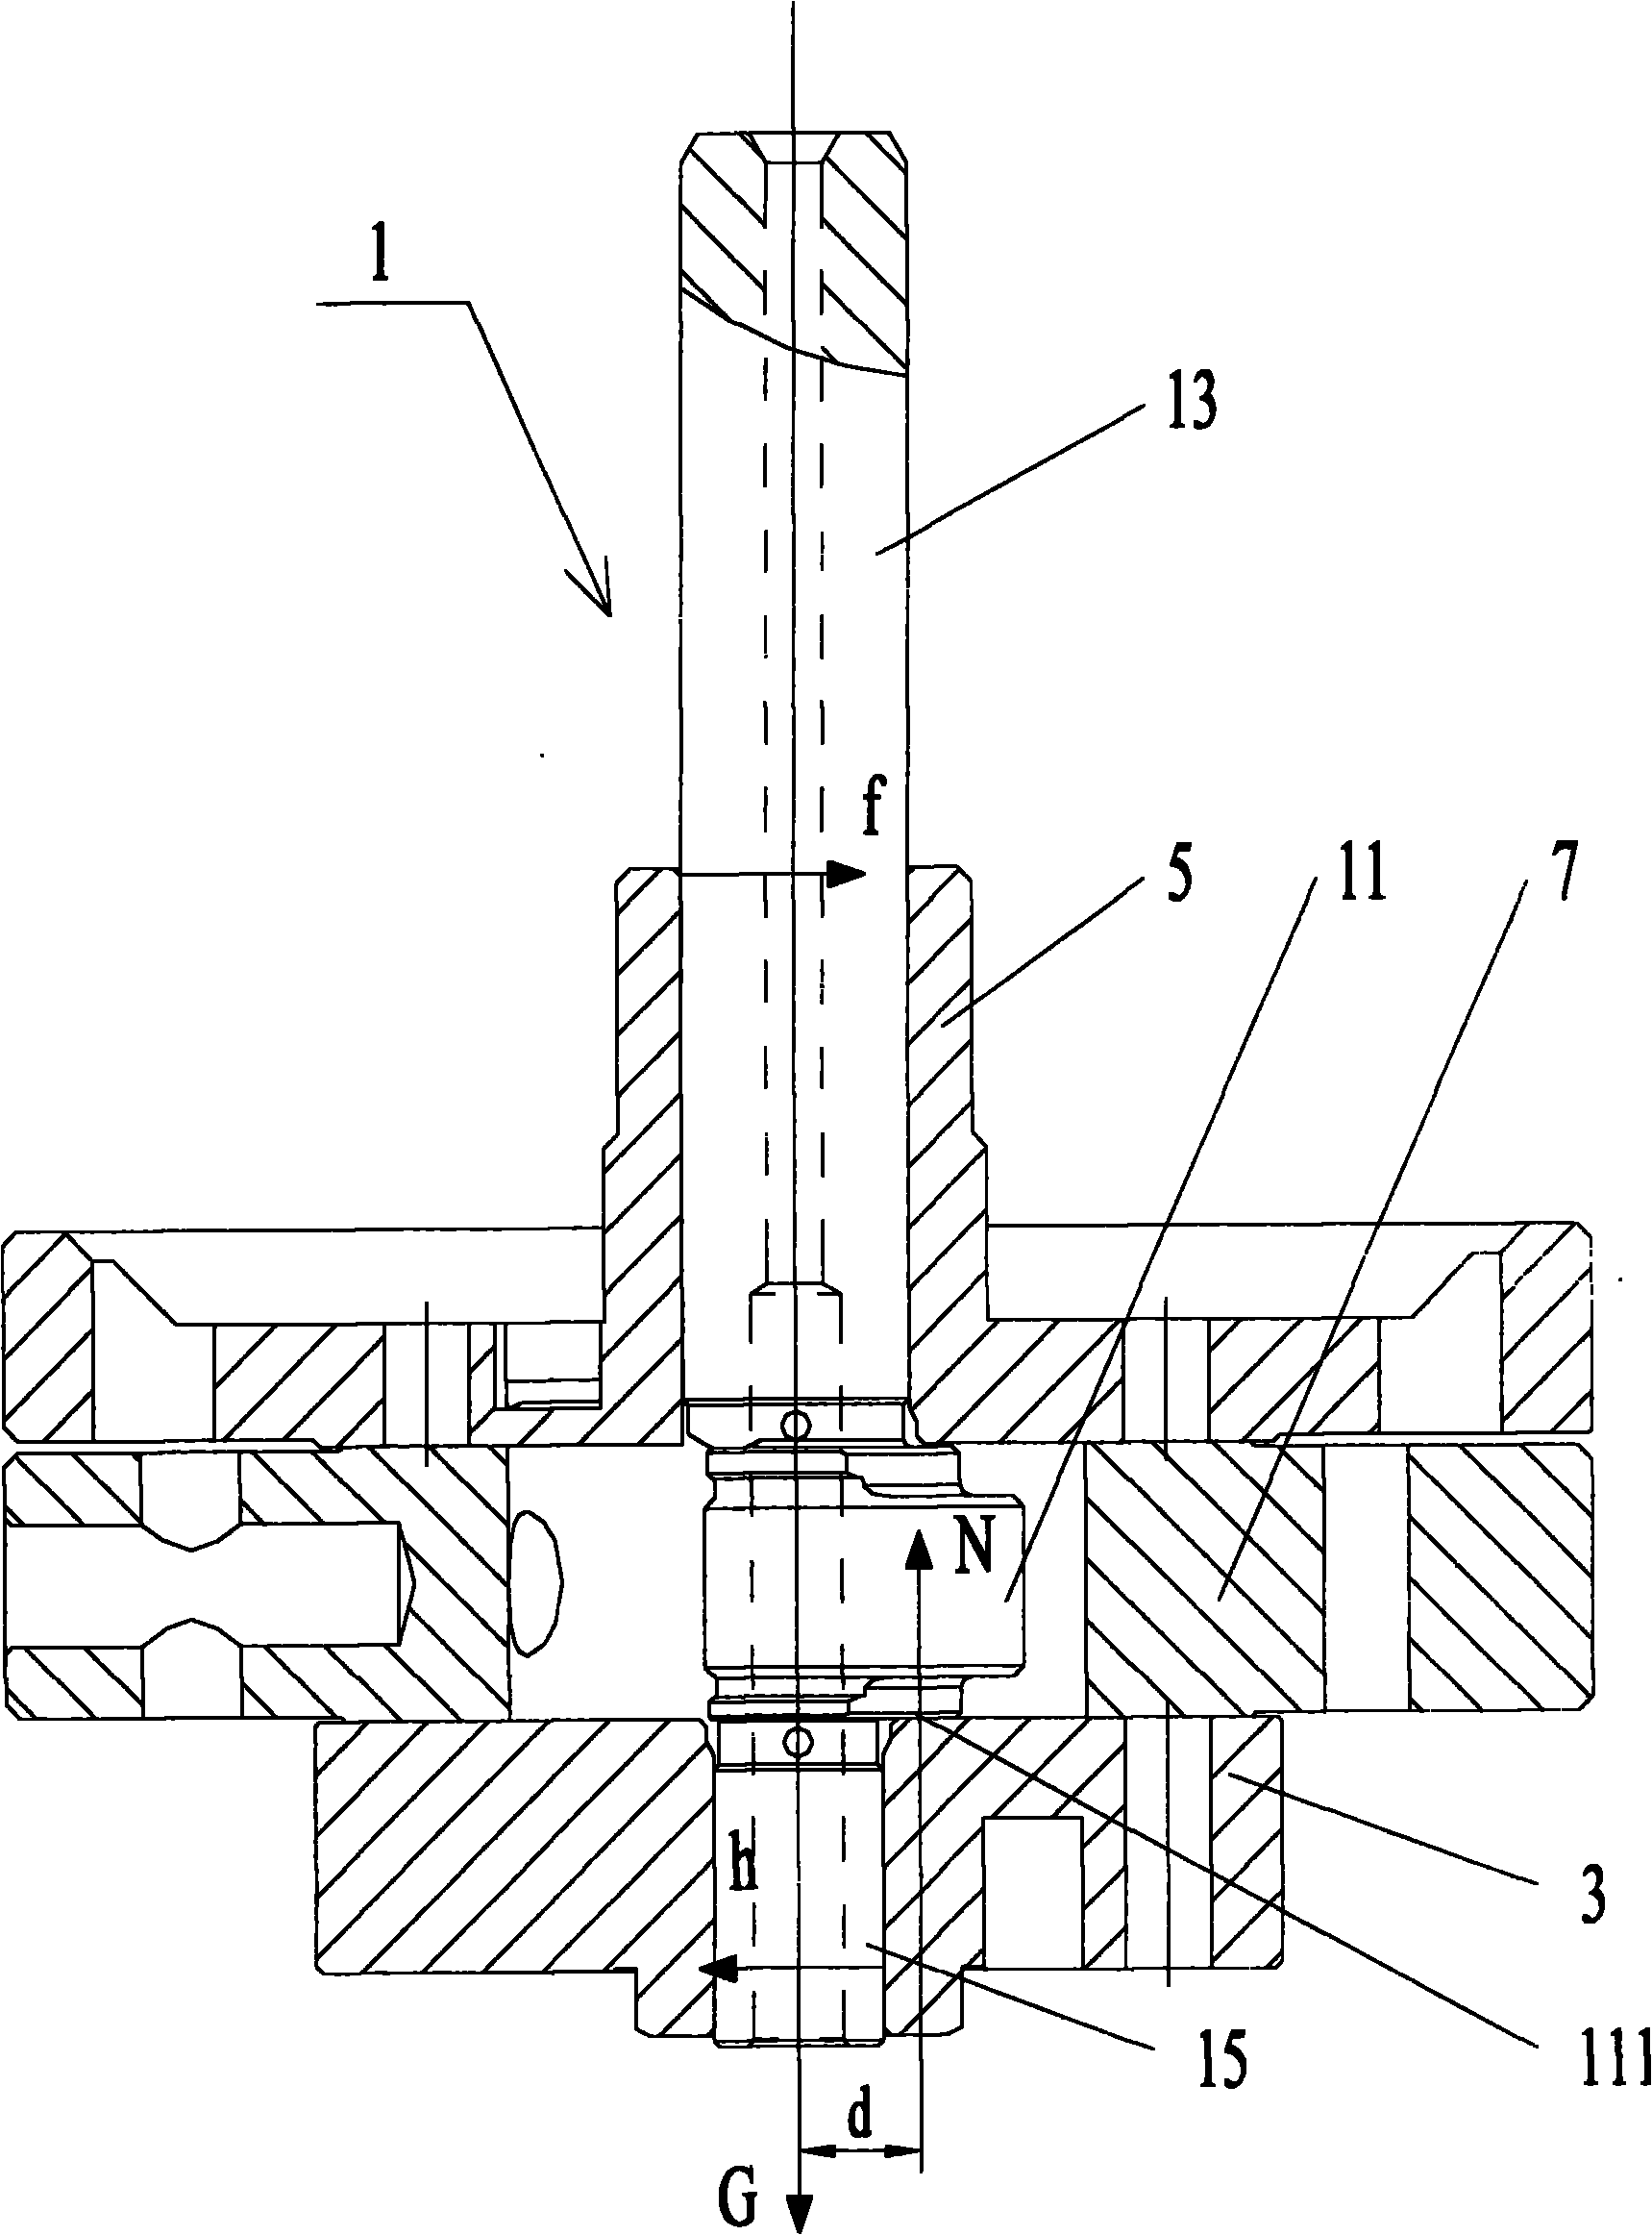 Pump body structure of compressor and compressor with same